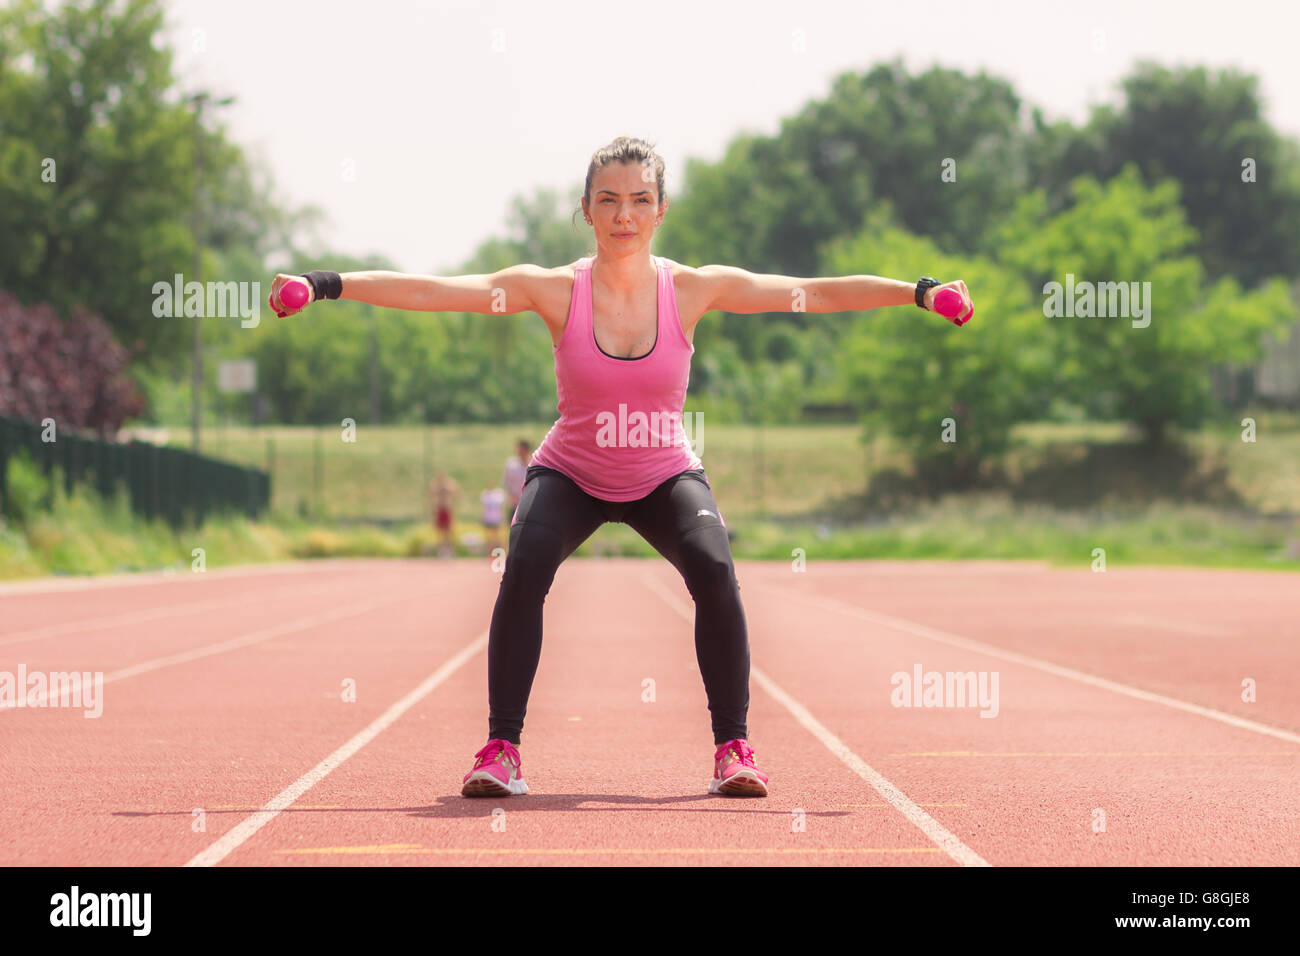 Girl athlete squat weights running track red Stock Photo